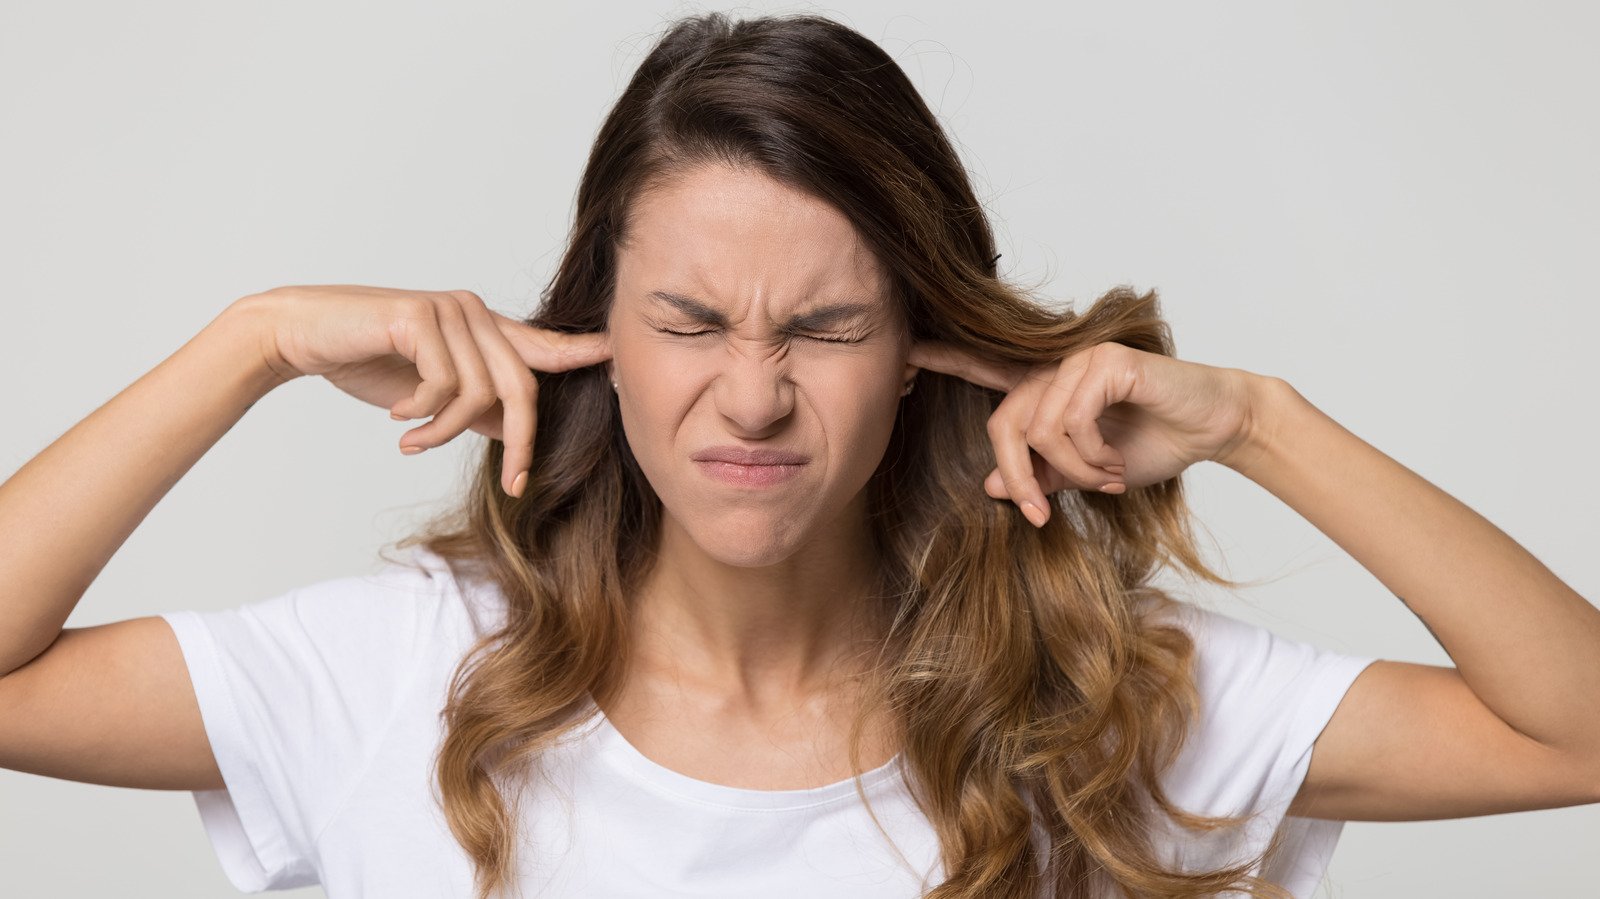 What Are Ringing Ears Really A Sign Of? - Health Digest